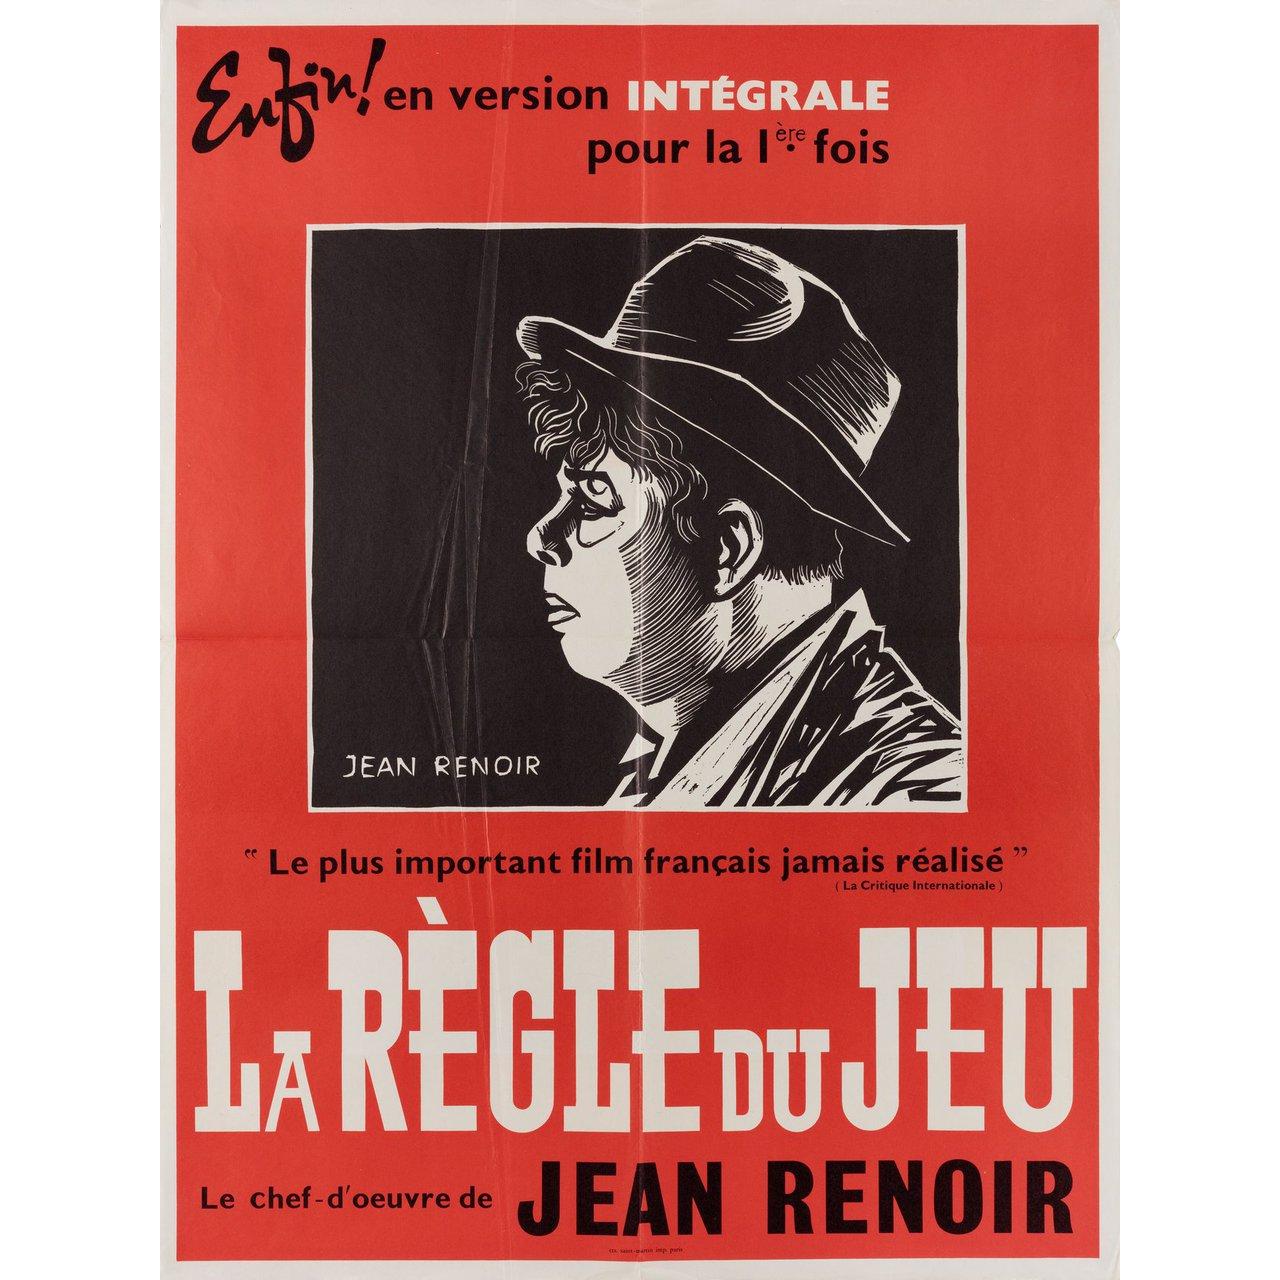 Original 1950s re-release French moyenne poster by Jean Renoir for the 1939 film The Rules of the Game (La Regle du Jeu) directed by Jean Renoir with Nora Gregor / Paulette Dubost / Mila Parely / Odette Talazac. Very Good condition, folded with